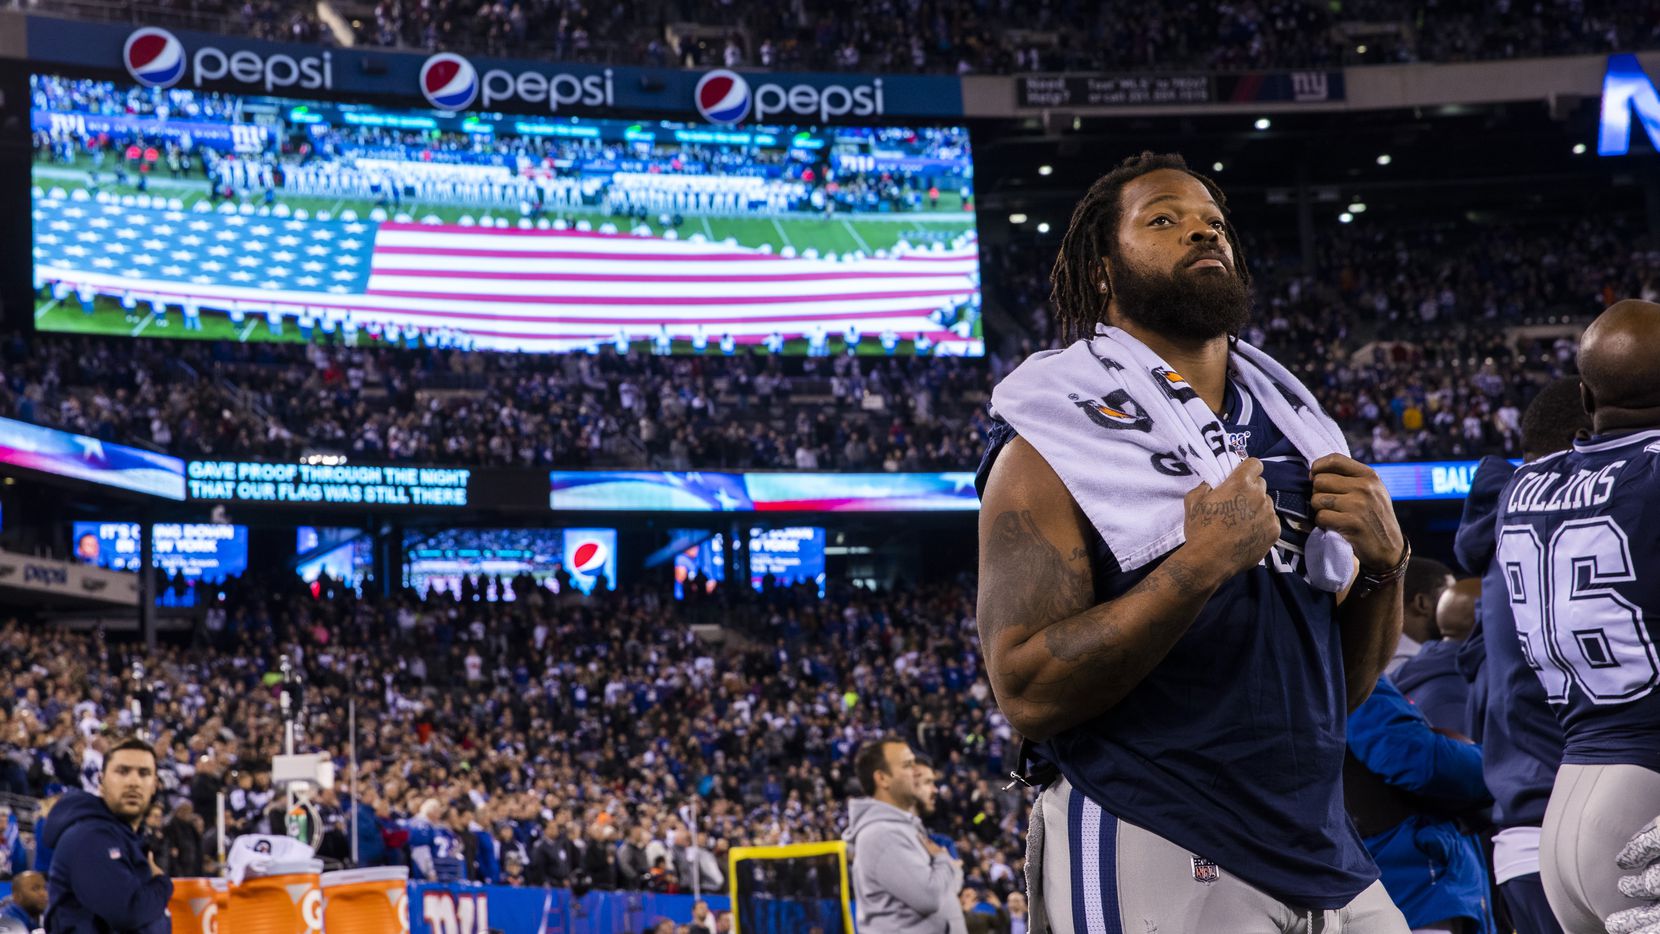 Michael Bennett Stands For The National Anthem Ahead Of